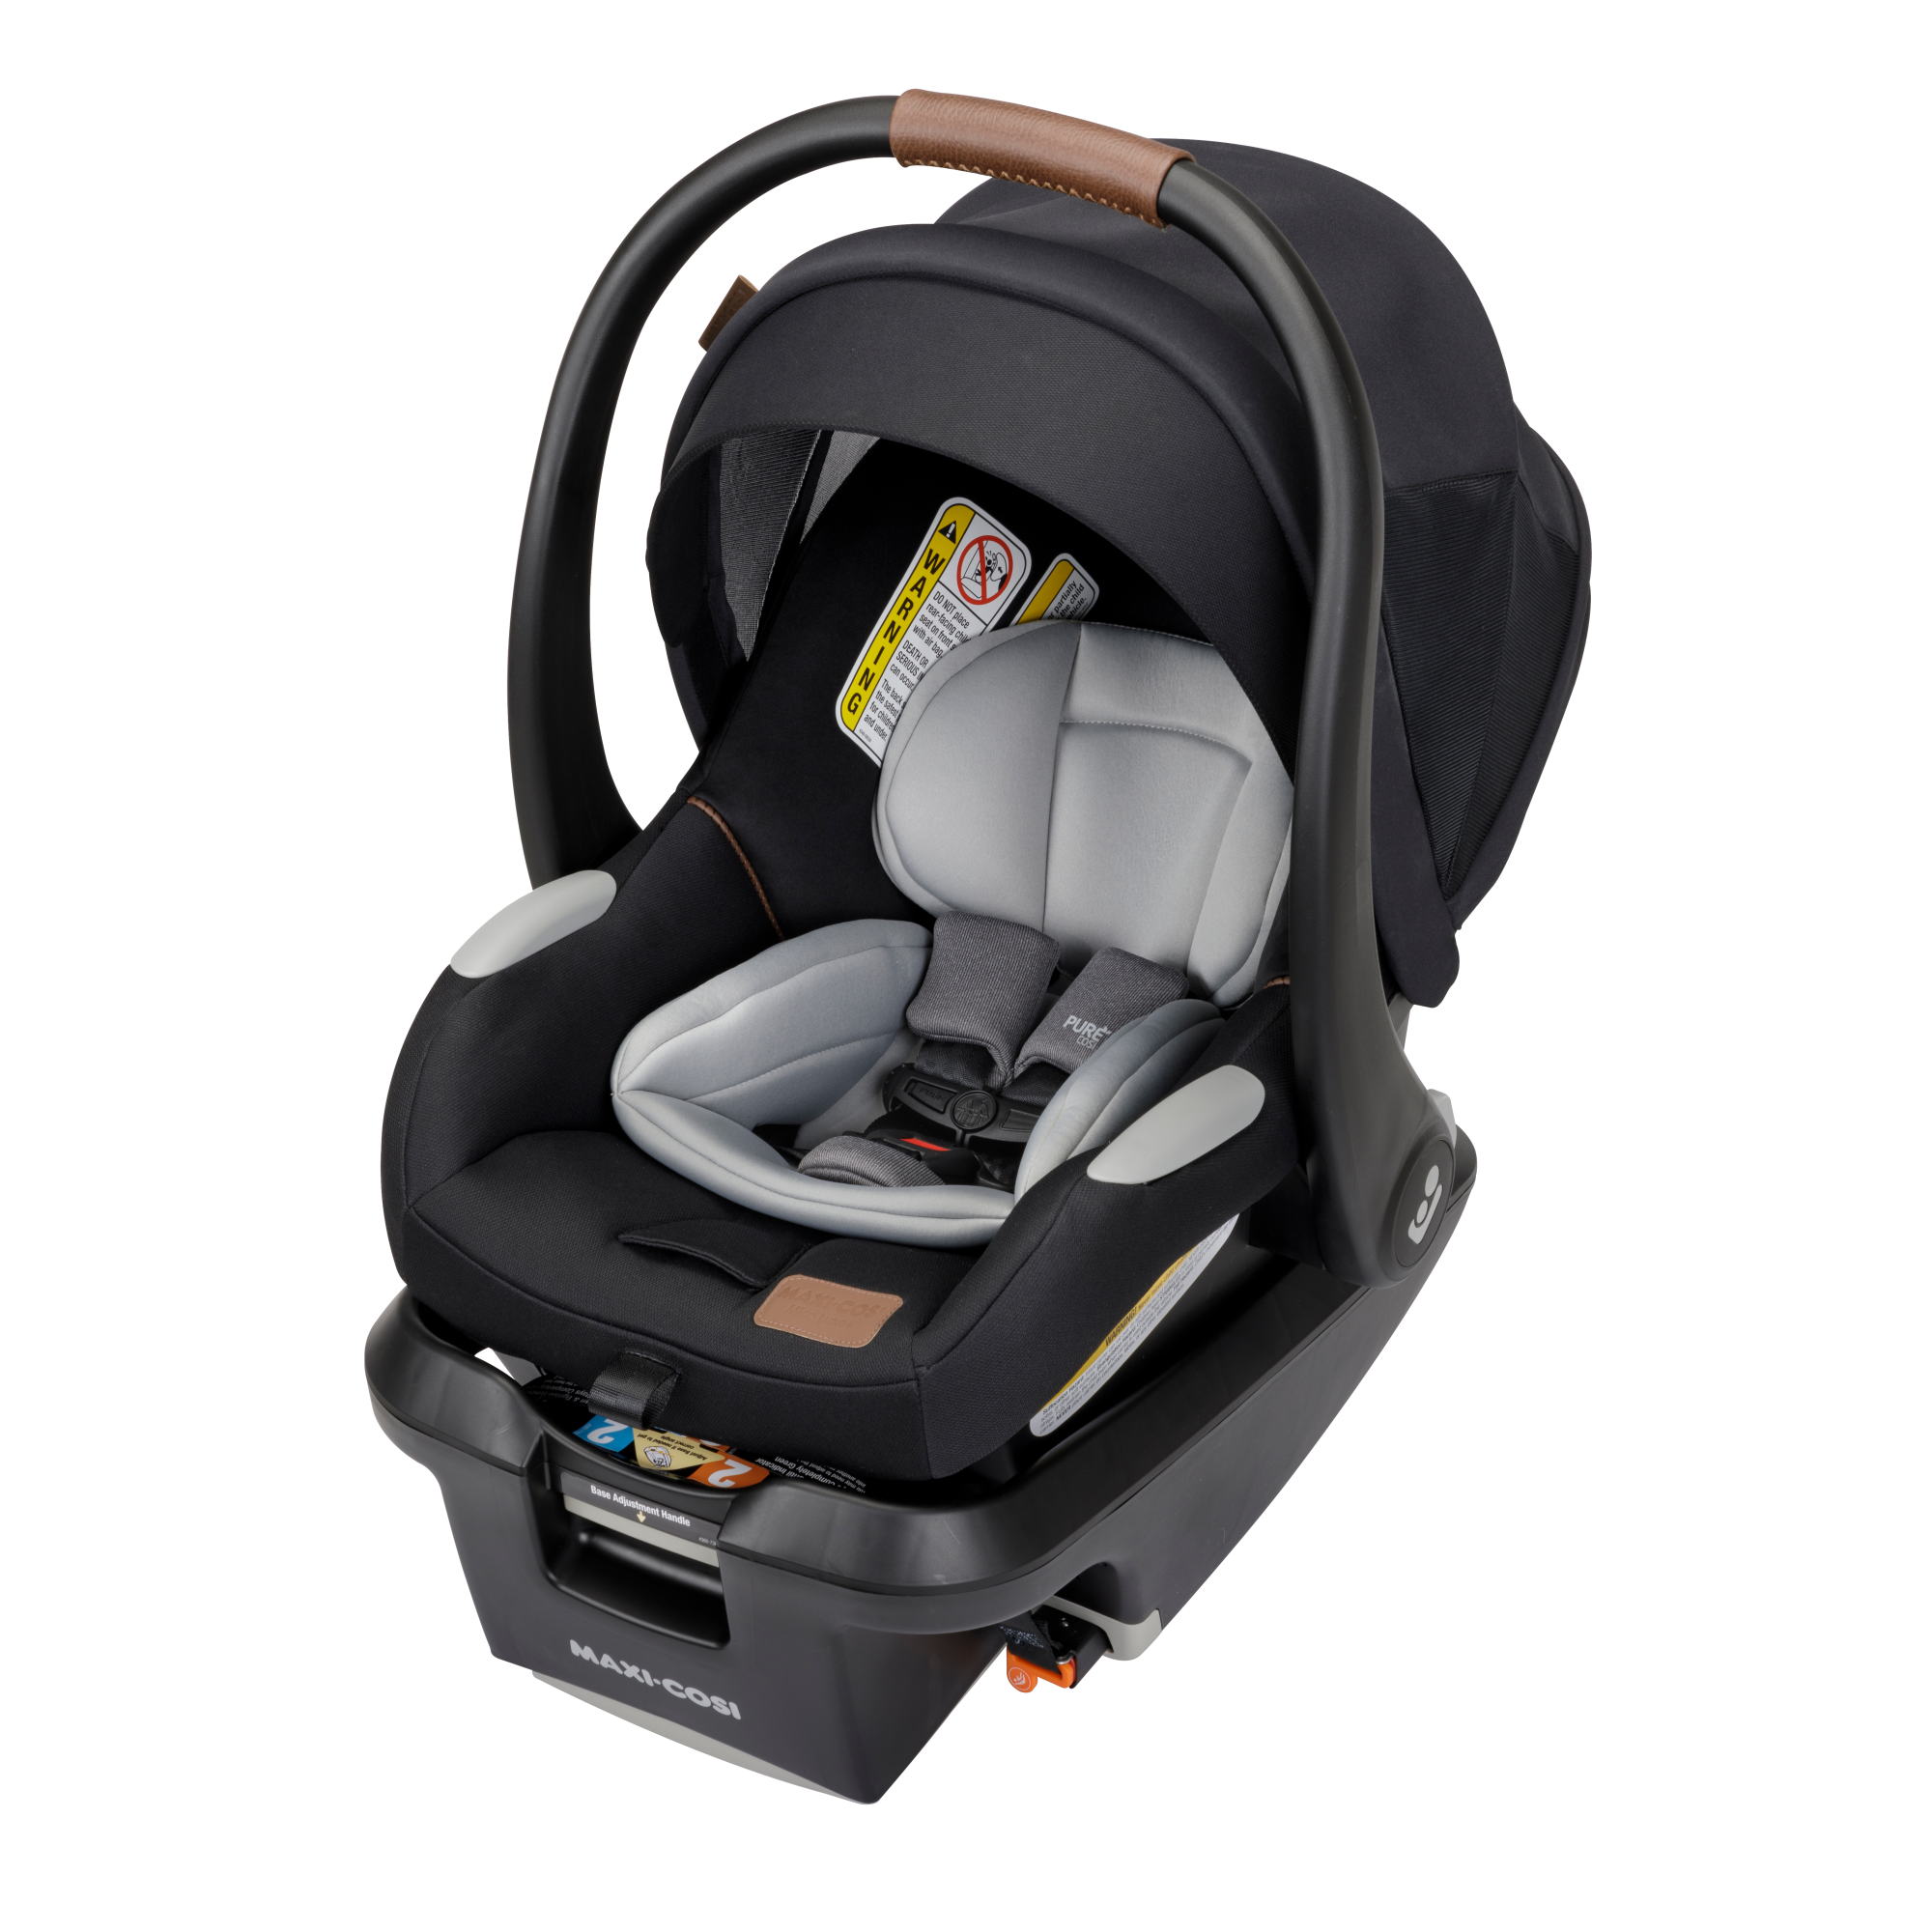 Mico™ Luxe+ Infant Car Seat - Essential Black - 45 degree angle view of left side